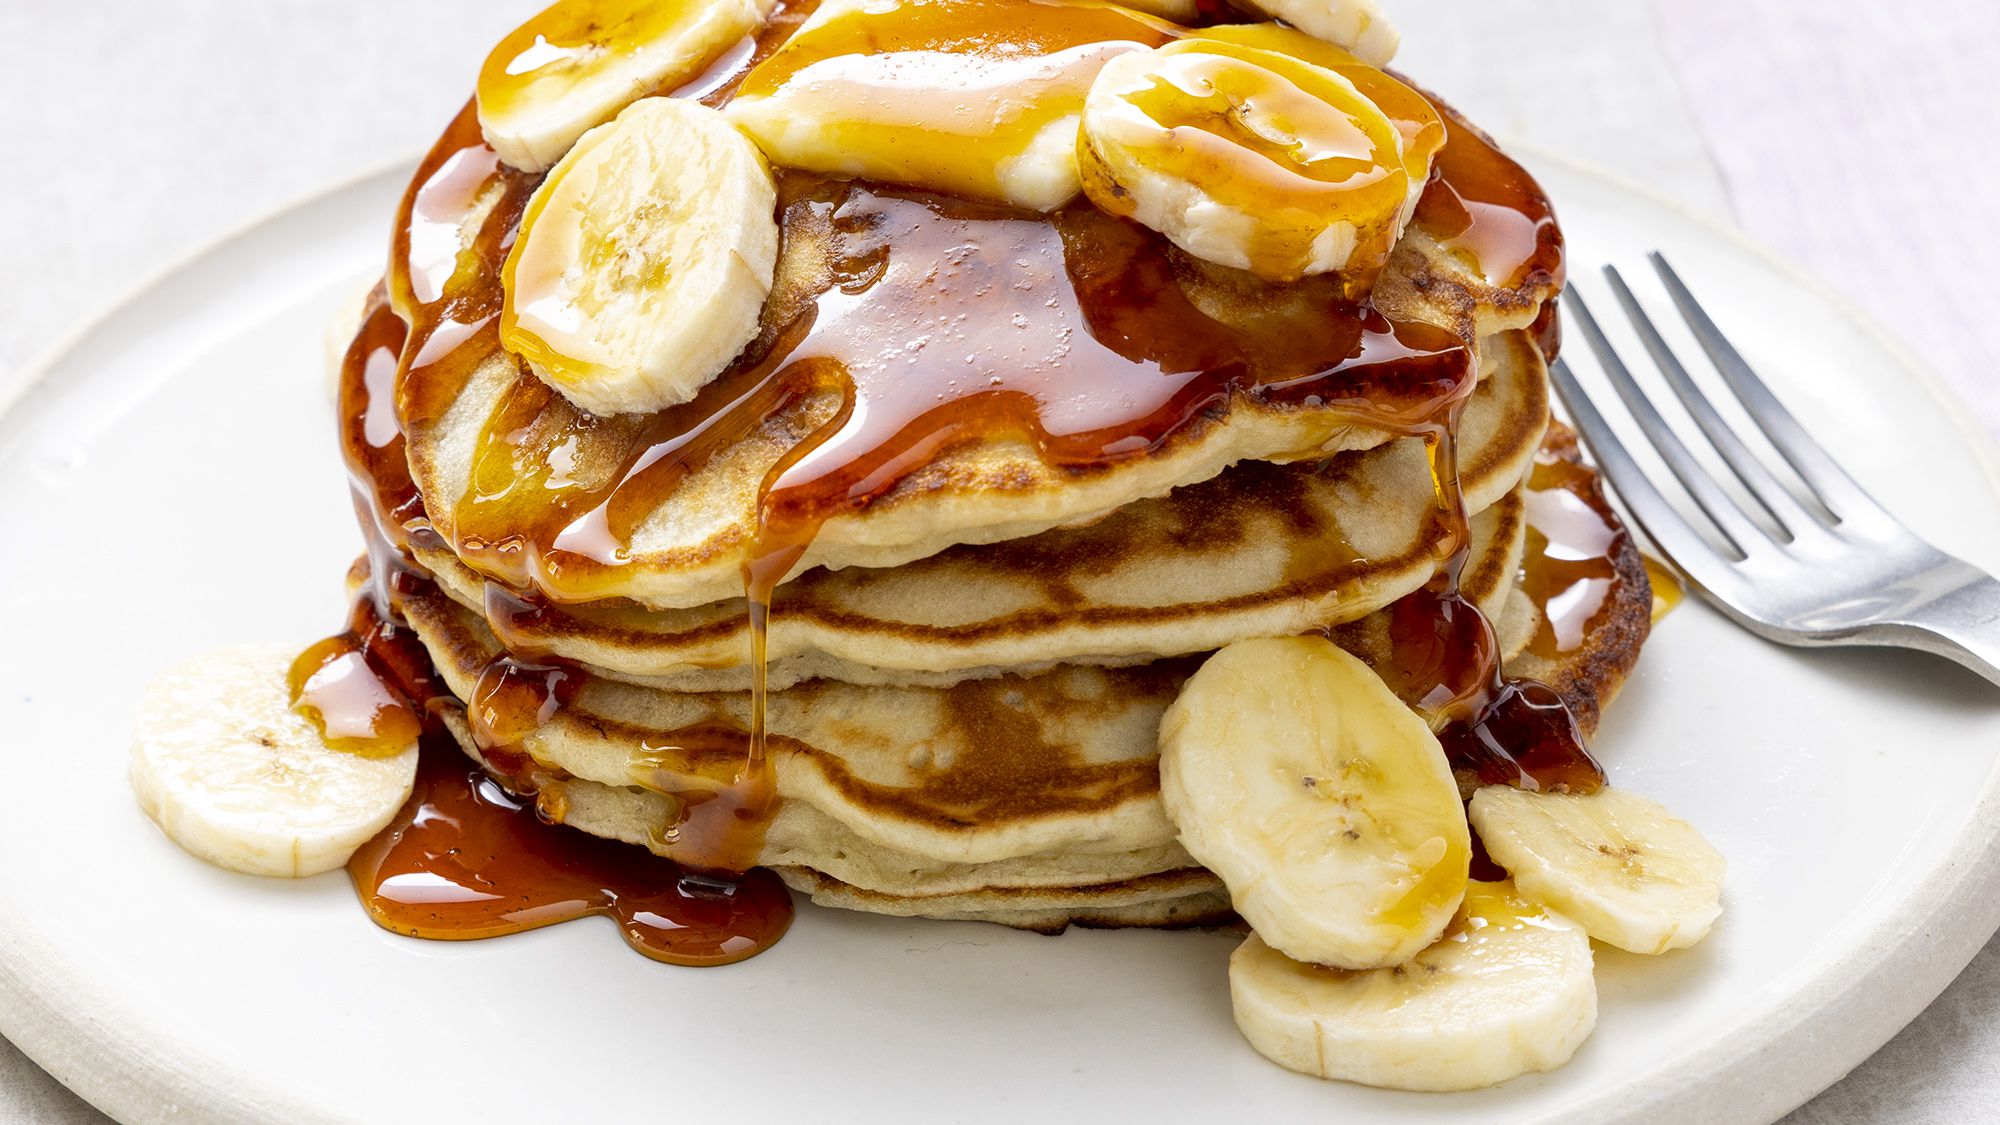 How many calories are in 2 pancakes with syrup?